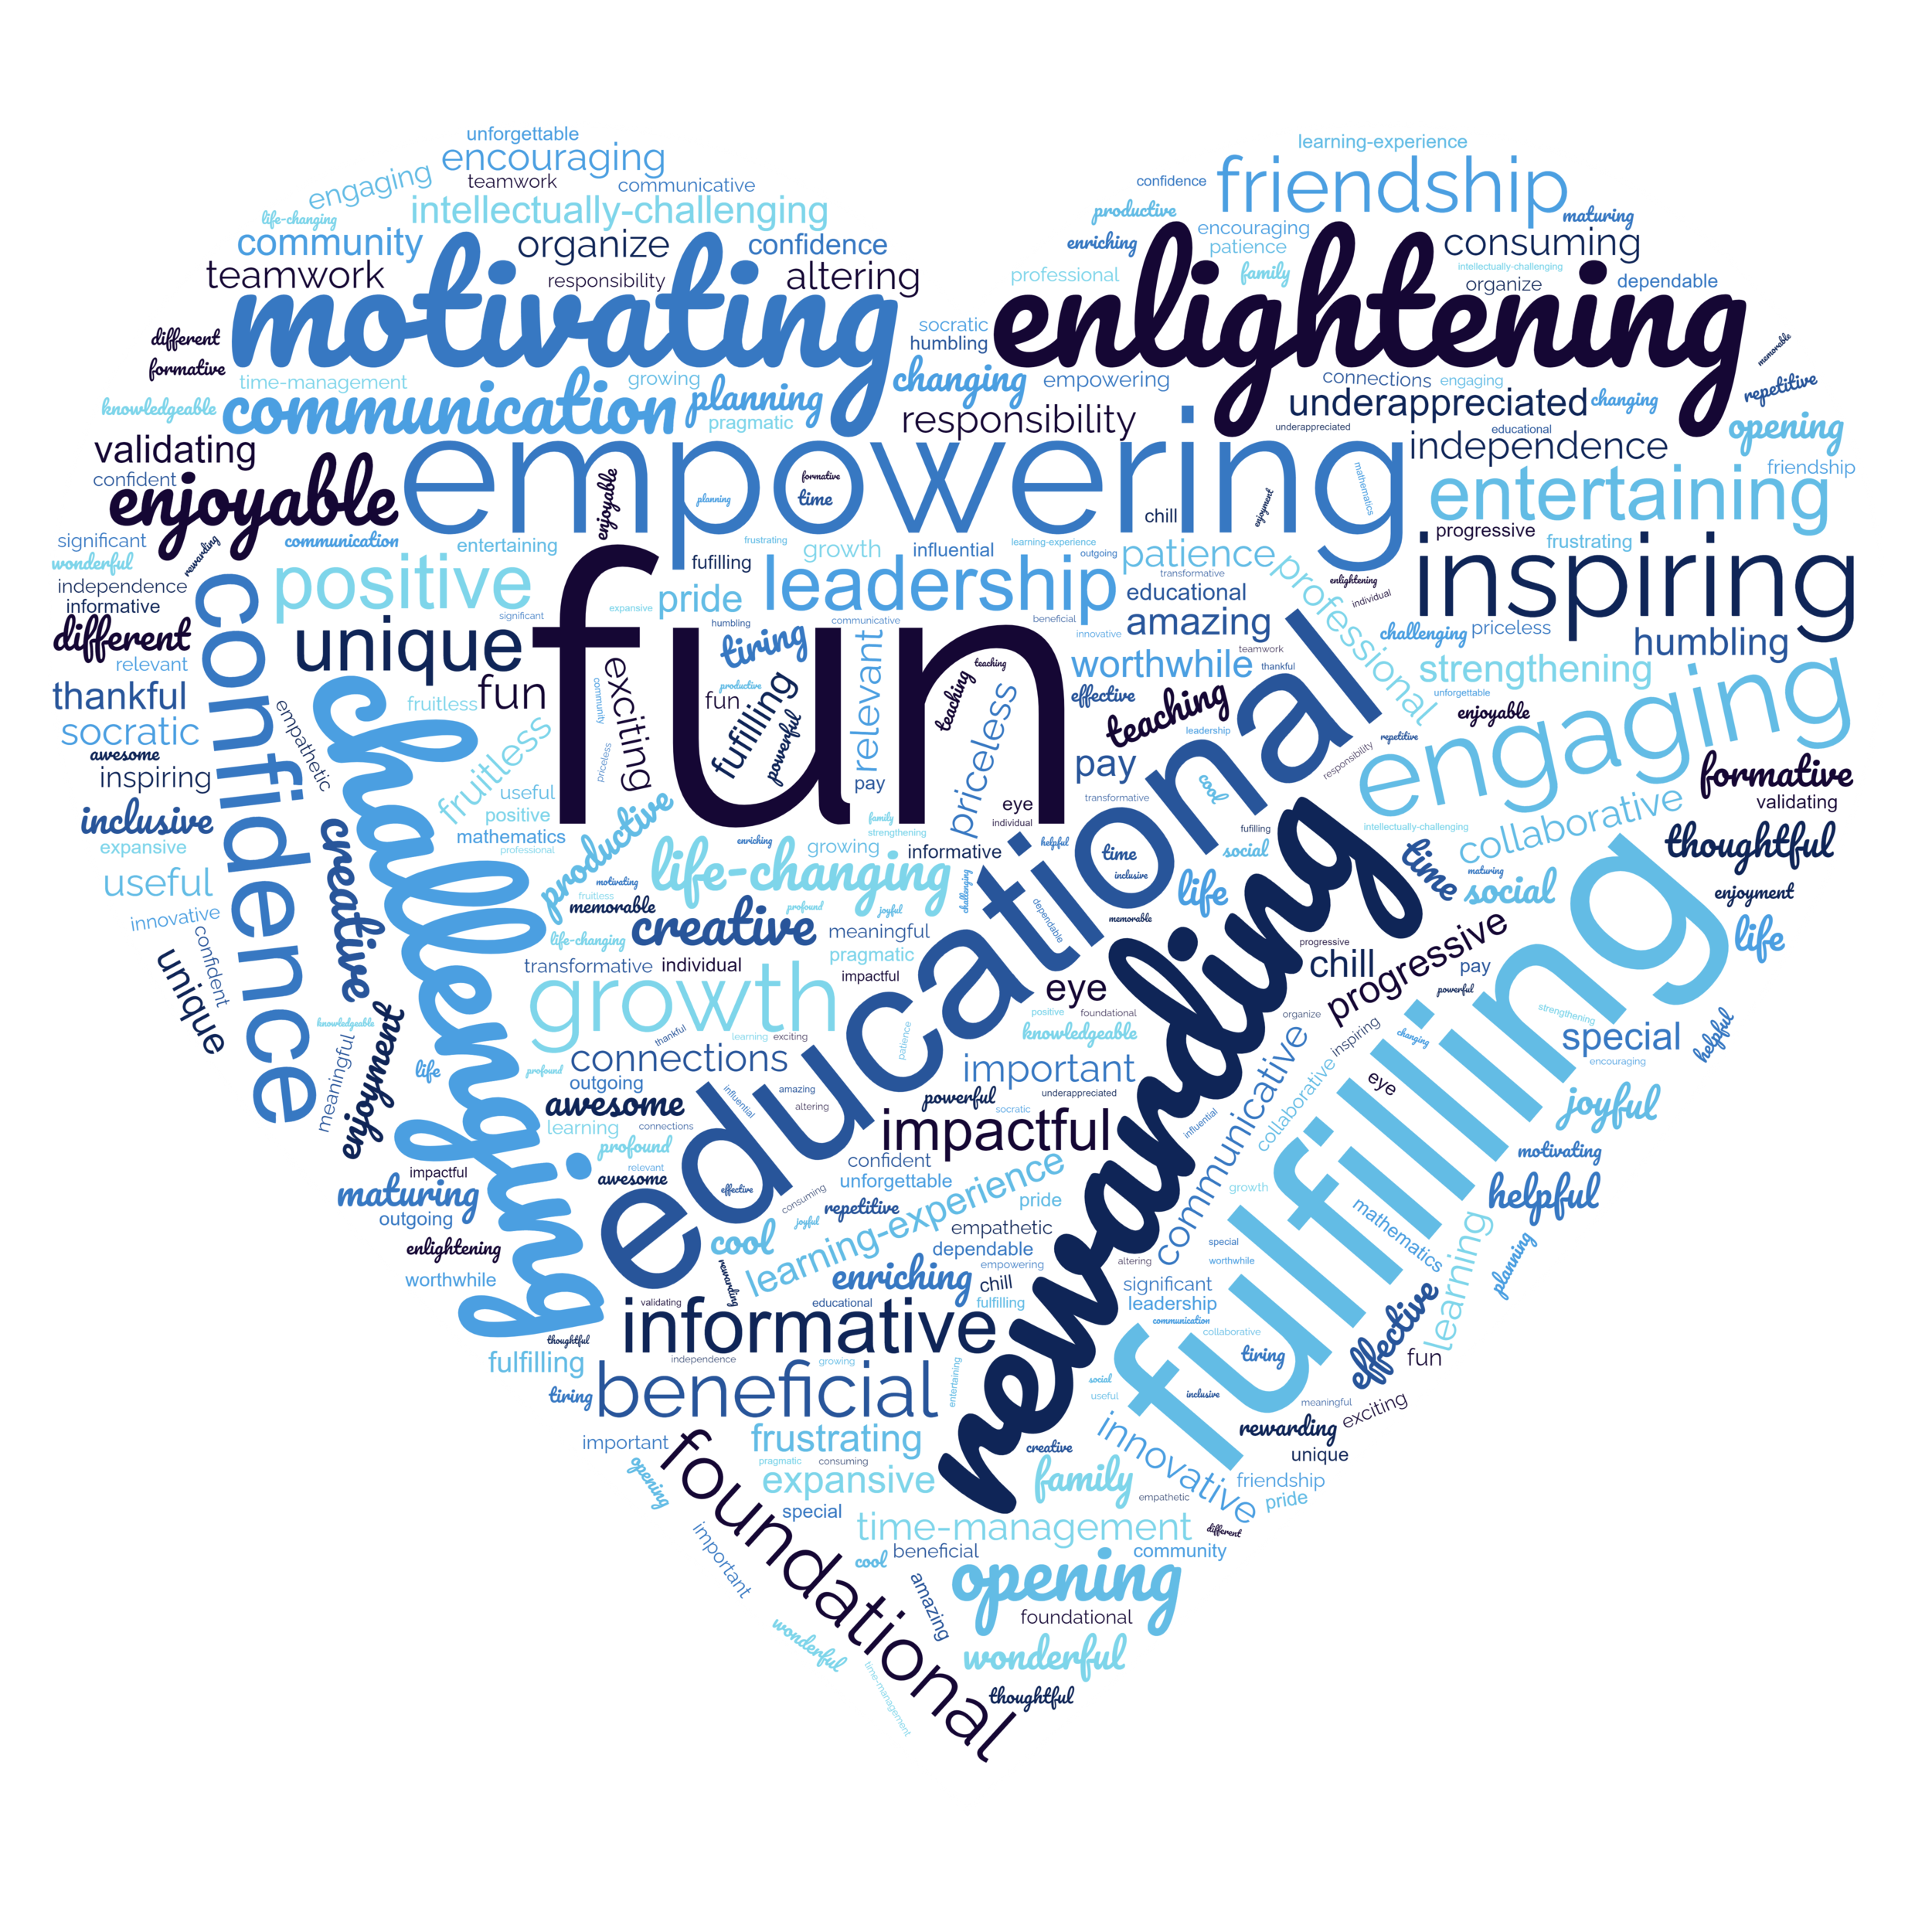 Word cloud in the shape of a heart with words describing the SI Leader experience